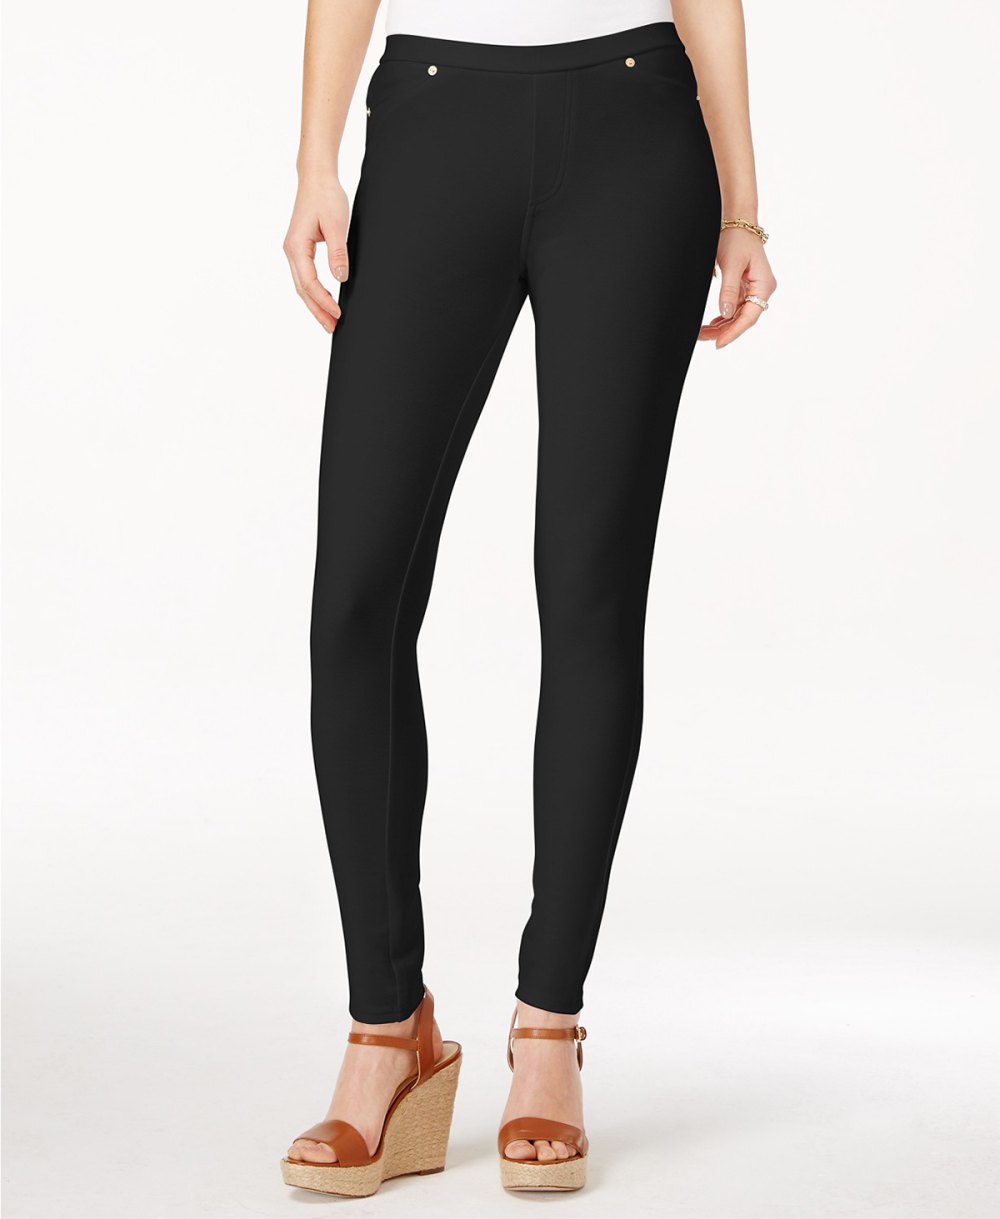 Michael Kors Leggings You Can Even Wear to the Office (25% Off